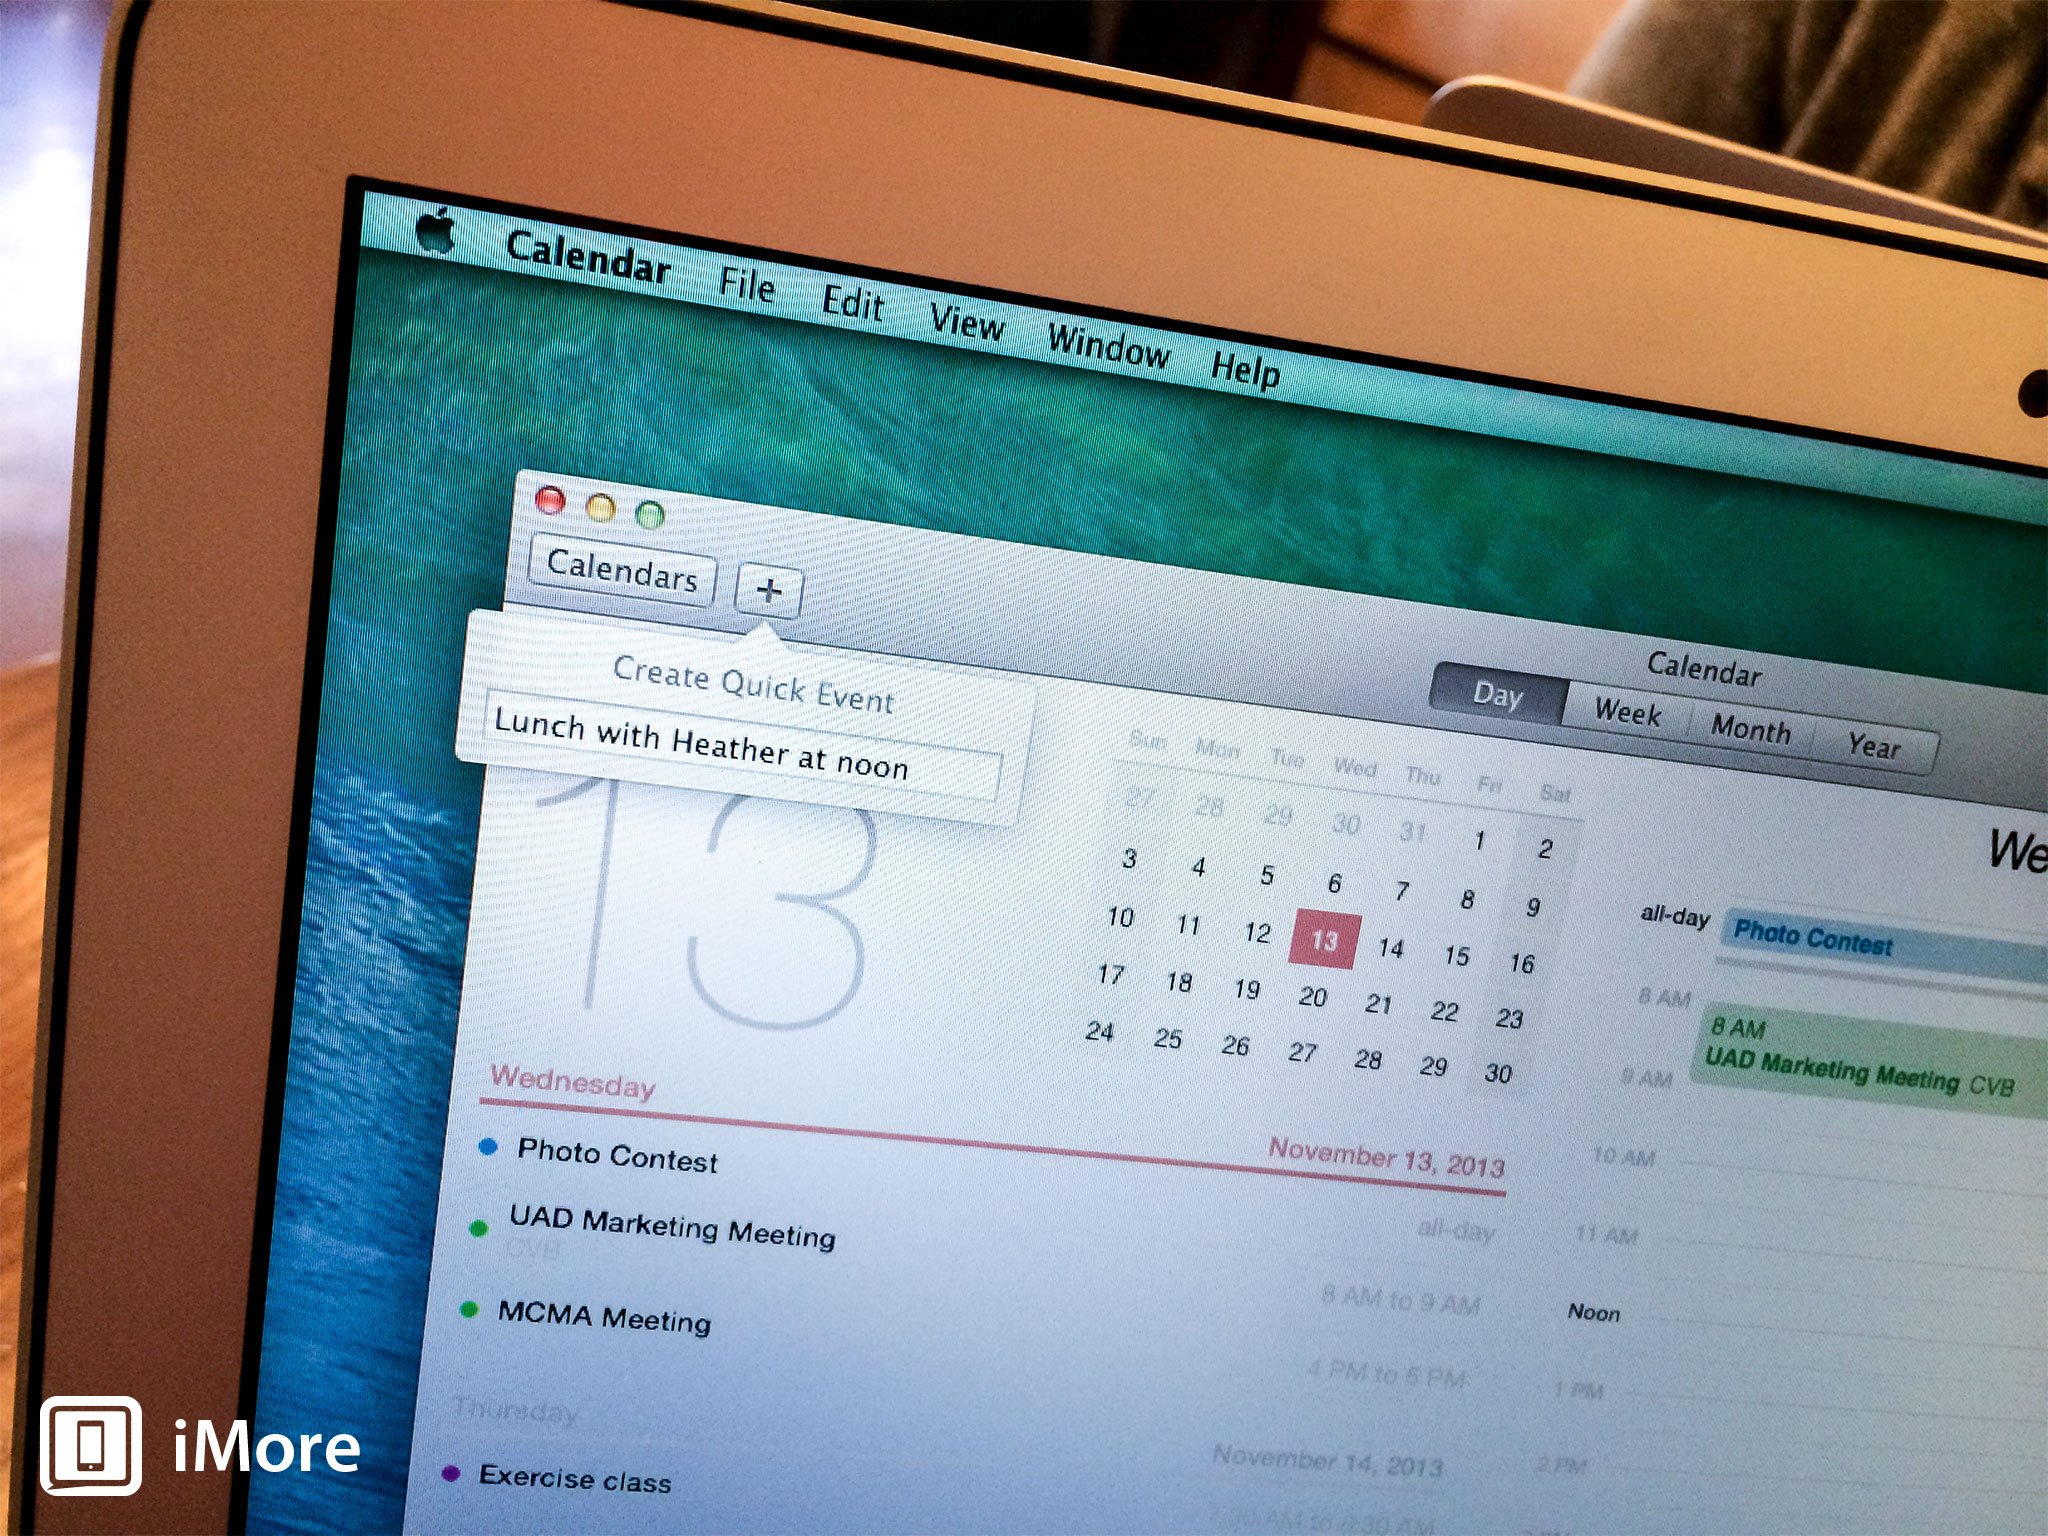 How to add an event using natural language in the Mac OS X Calendar app 